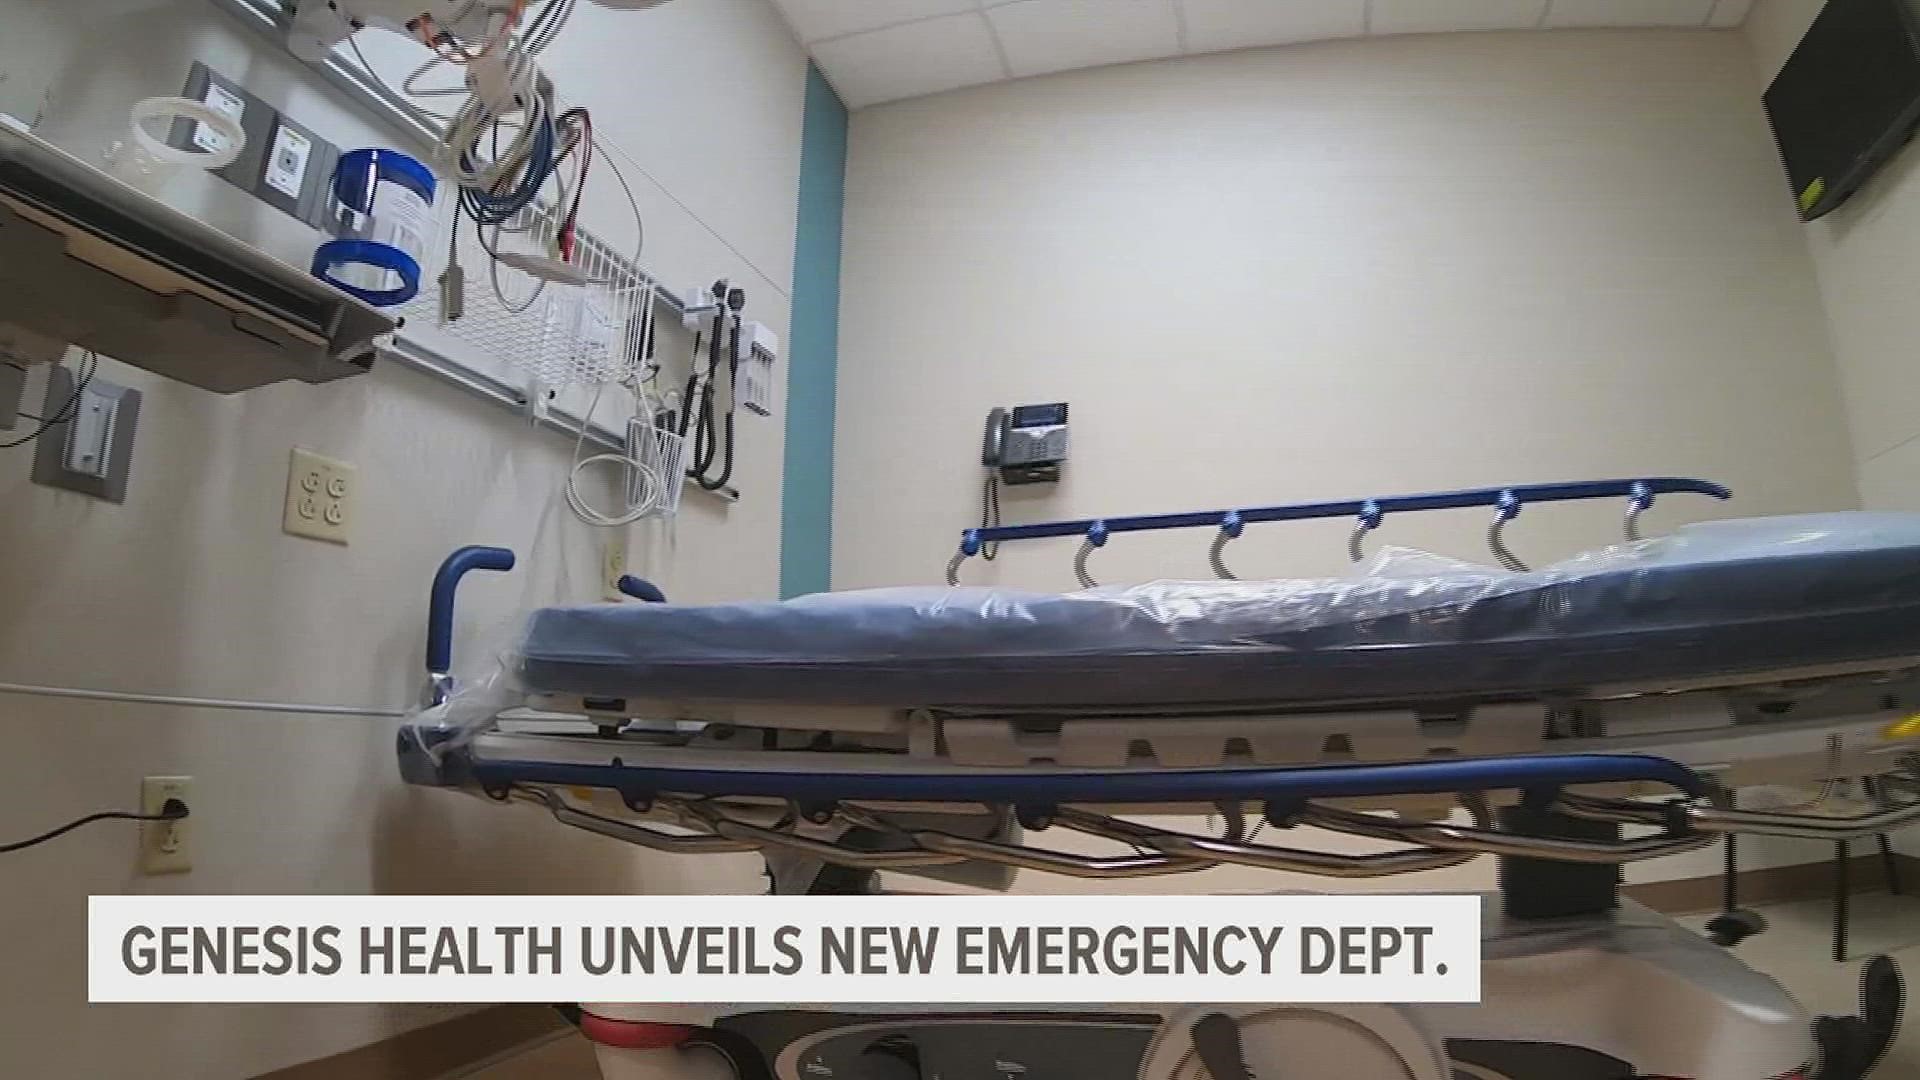 The new Emergency Department will be open on Dec. 8 at the Genesis HealthPlex in Bettendorf.